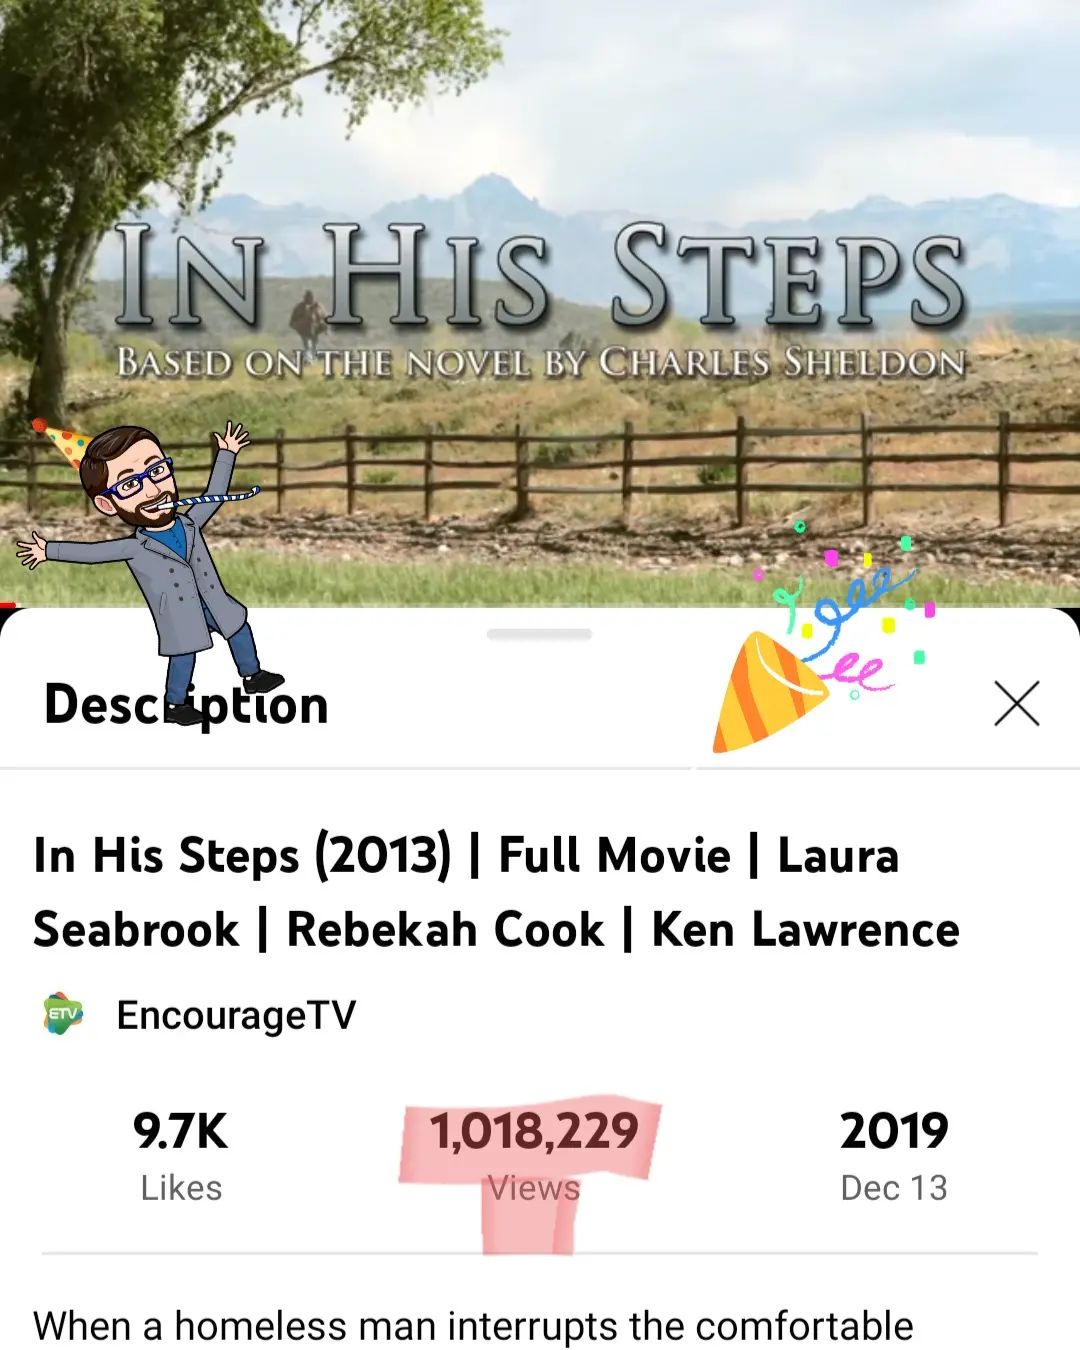 Praise the Lord! Our movie IN HIS STEPS has hit 1 MILLION VIEWS on the @bmgencouragetv YouTube channel! 😭
This year marks ten years since we began filming what started as a microbudget web series that then transformed into a microbudget feature film shot over two summers. It is my first and only feature film directing credit (so far! 😉) and it was early in my filmmaking career. It's by no means perfect, but God has allowed the message of the story to come through despite its technical flaws. I'm beyond amazed at how it continues to find an audience so many years after its release, and I'm excited to see where it goes from here.
.
.
.
.
#inhissteps #wwjd #christianfilmmaker #filmmakerslife #christianfilm #indiefilm #filmincolorado #whatwouldjesusdo #inhisstepsmovie